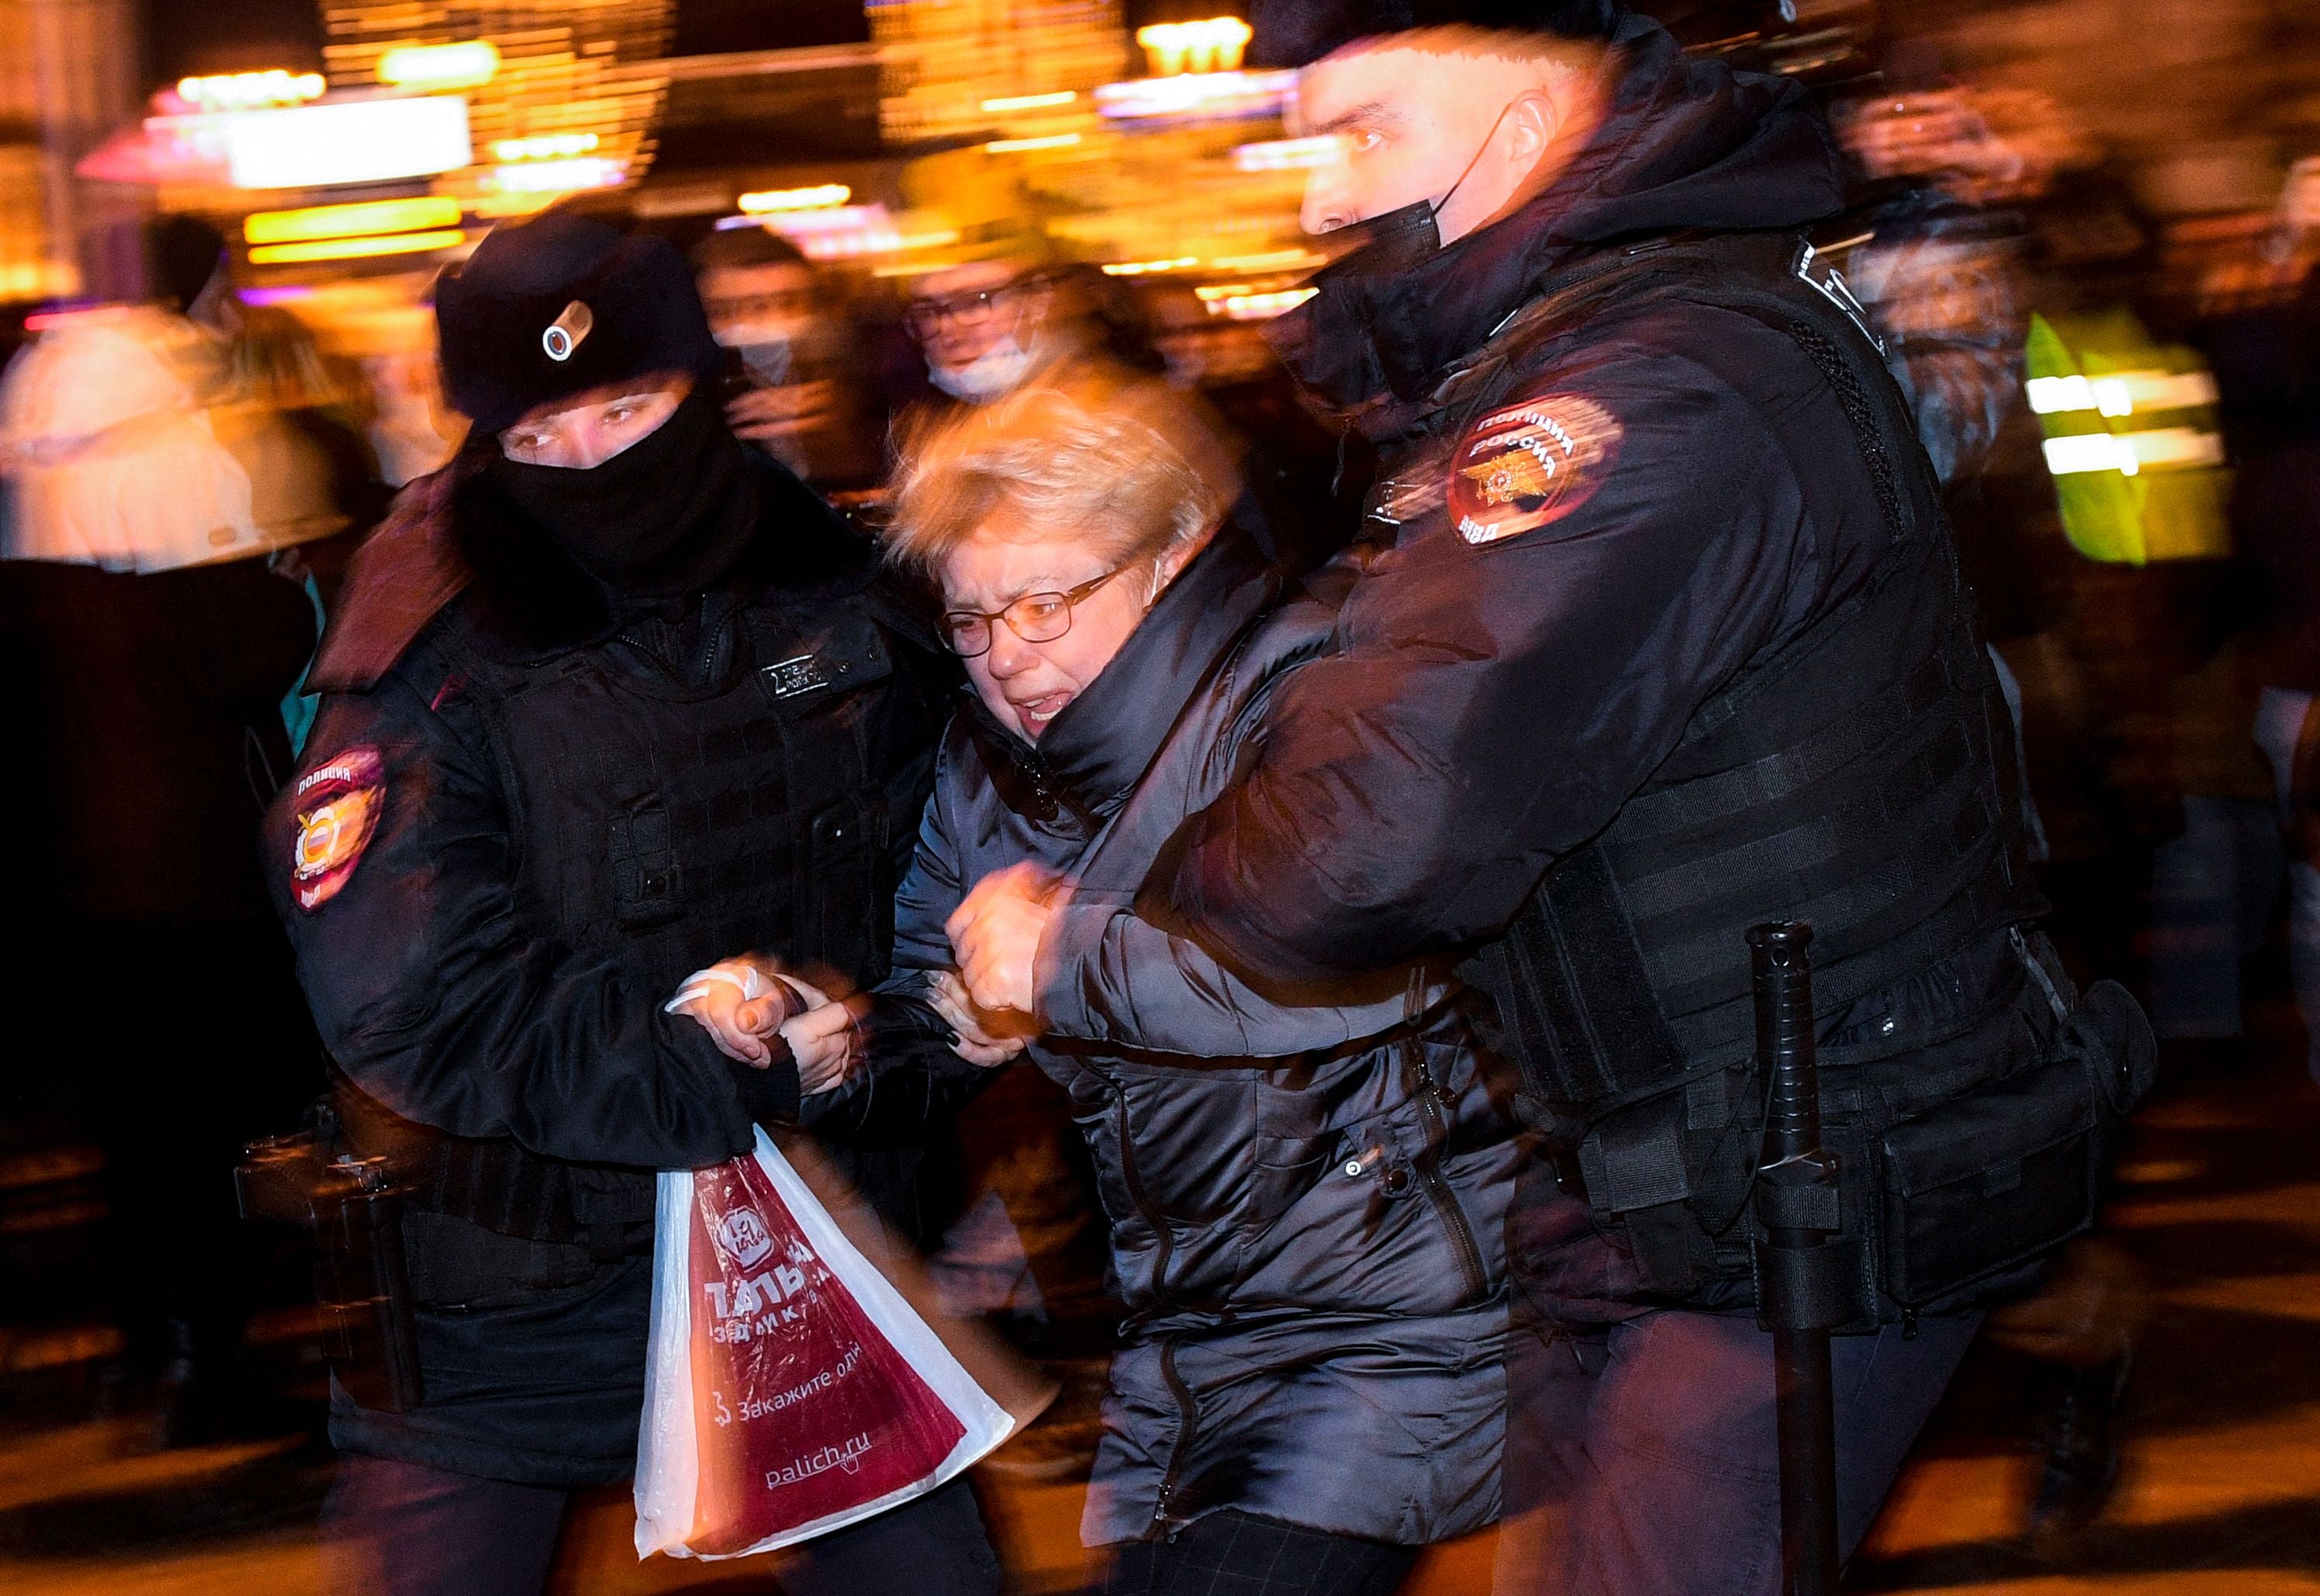 Police officers detain a demonstrator during a protest against Russia's invasion of Ukraine in Moscow on February 24, 2022